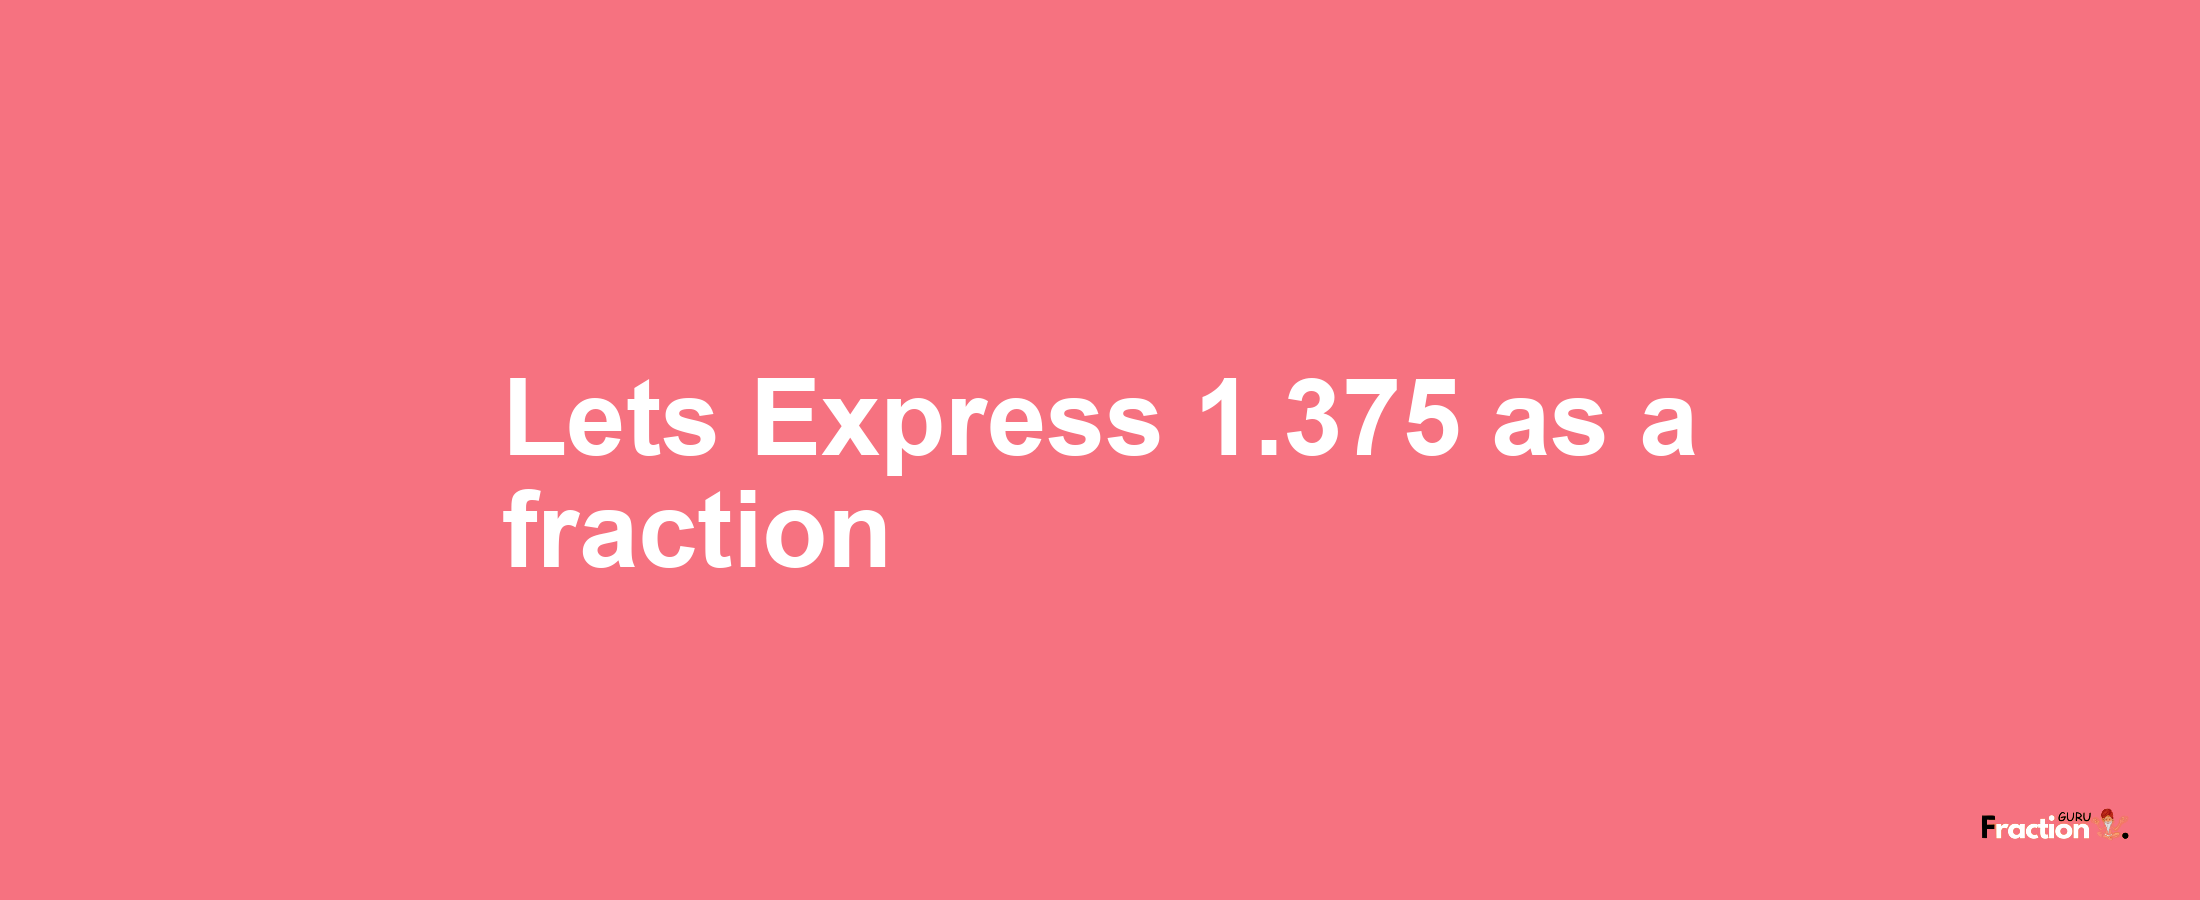 Lets Express 1.375 as afraction